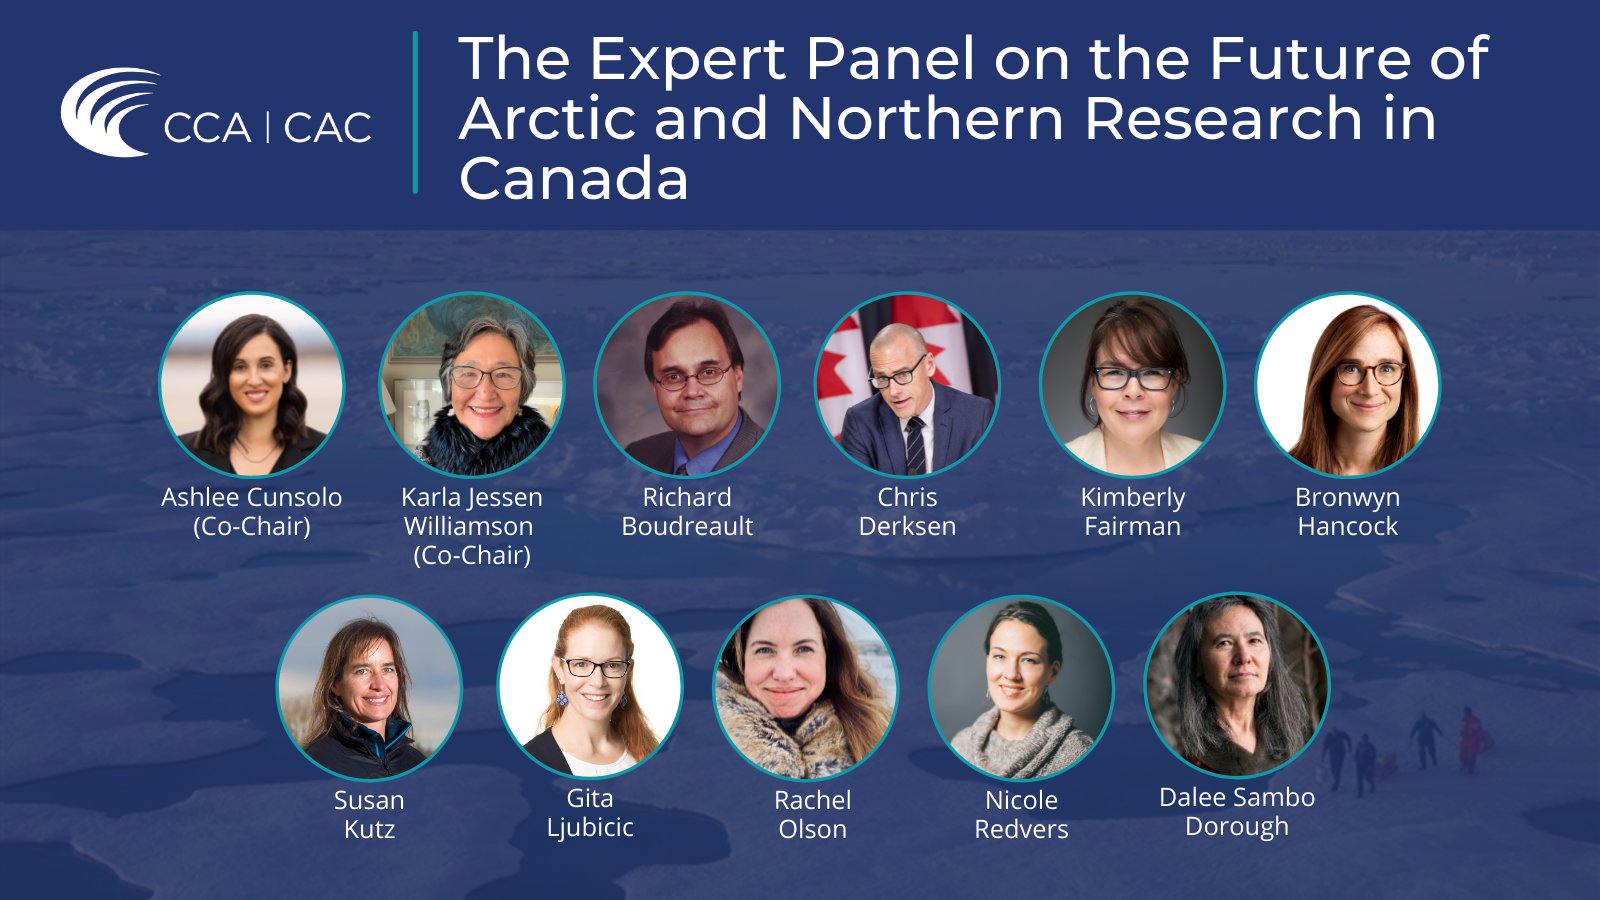 The Expert Panel on the Future of Arctic and Northern Research in Canada